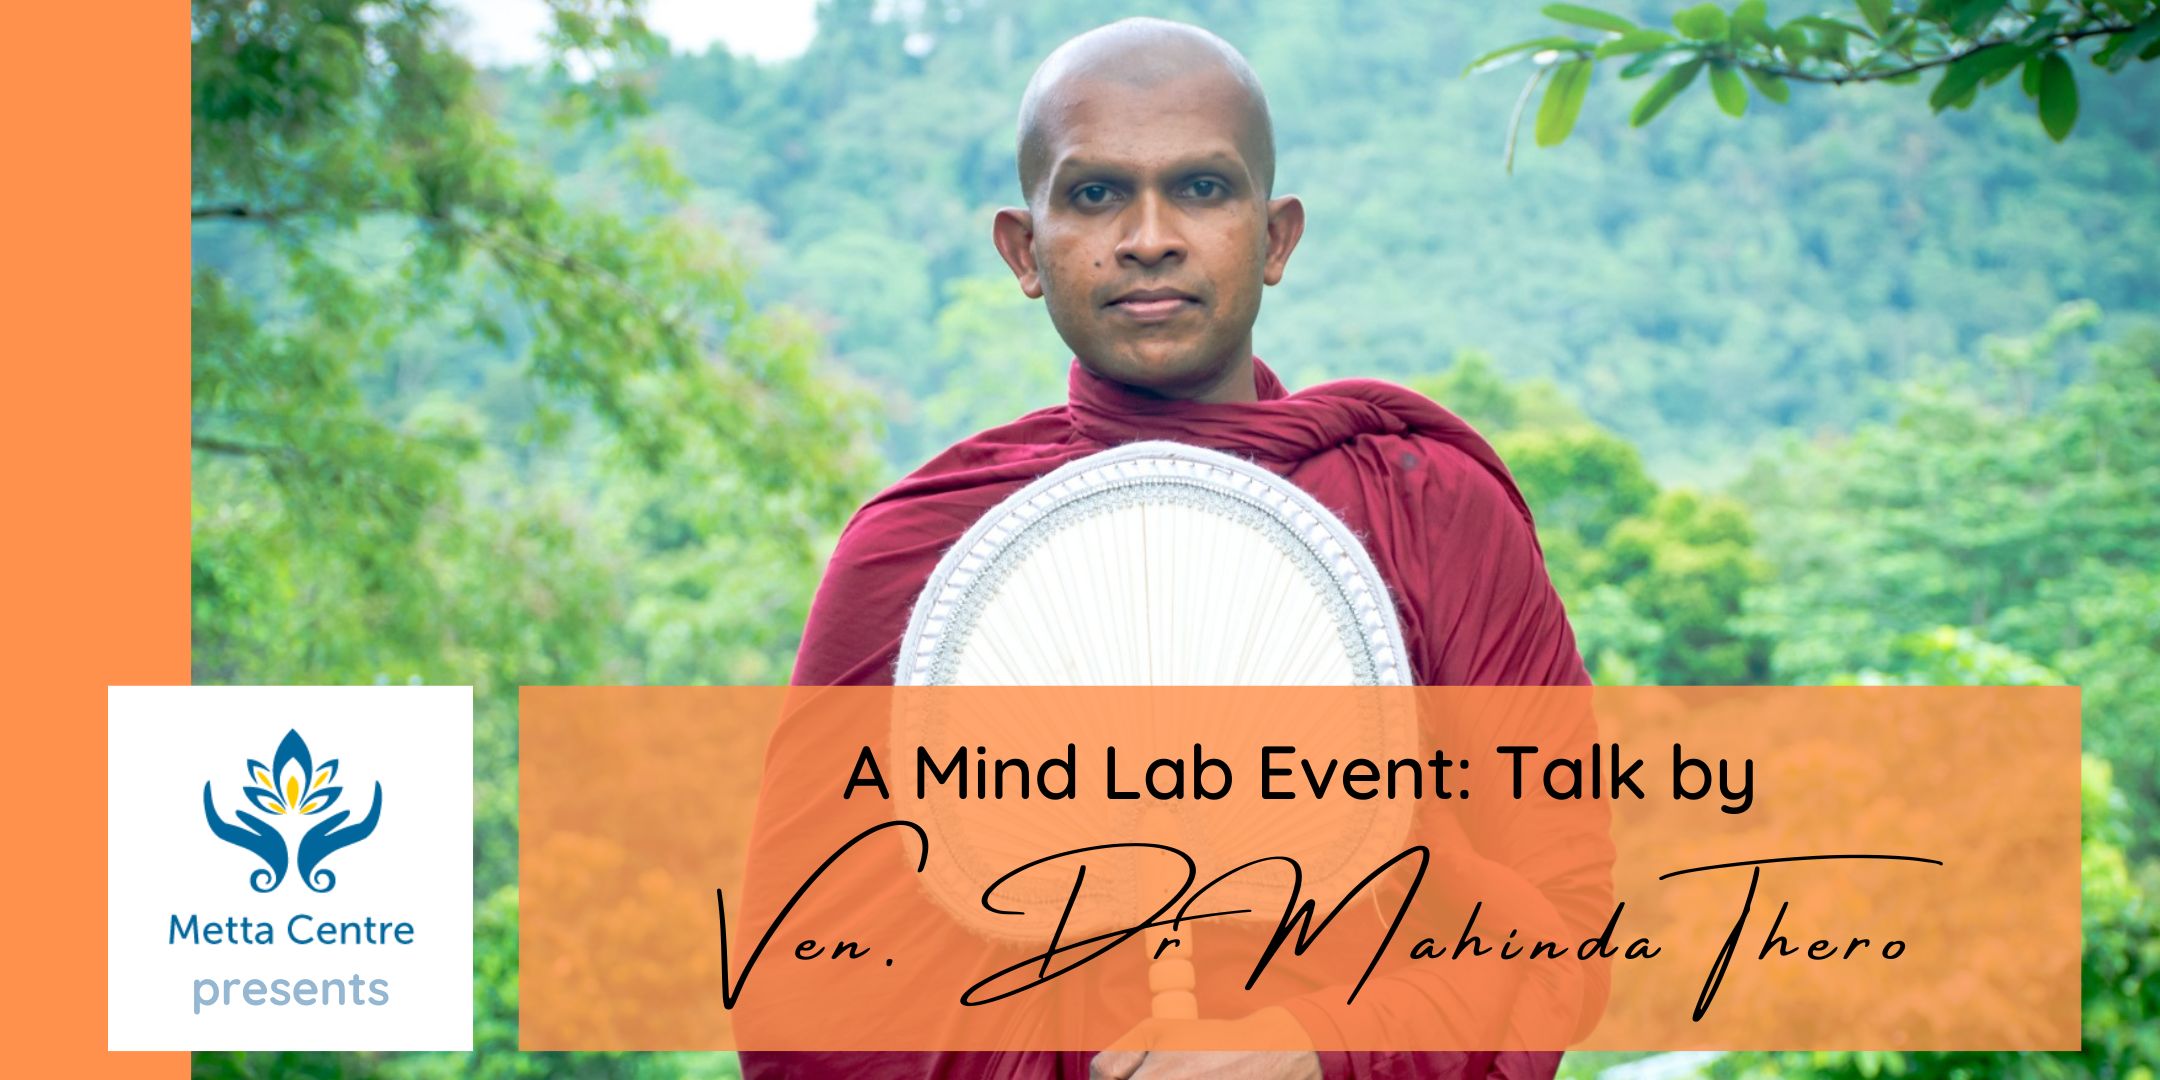 The Nature of Nature: The Happiness of Realization - A Mind Lab Event